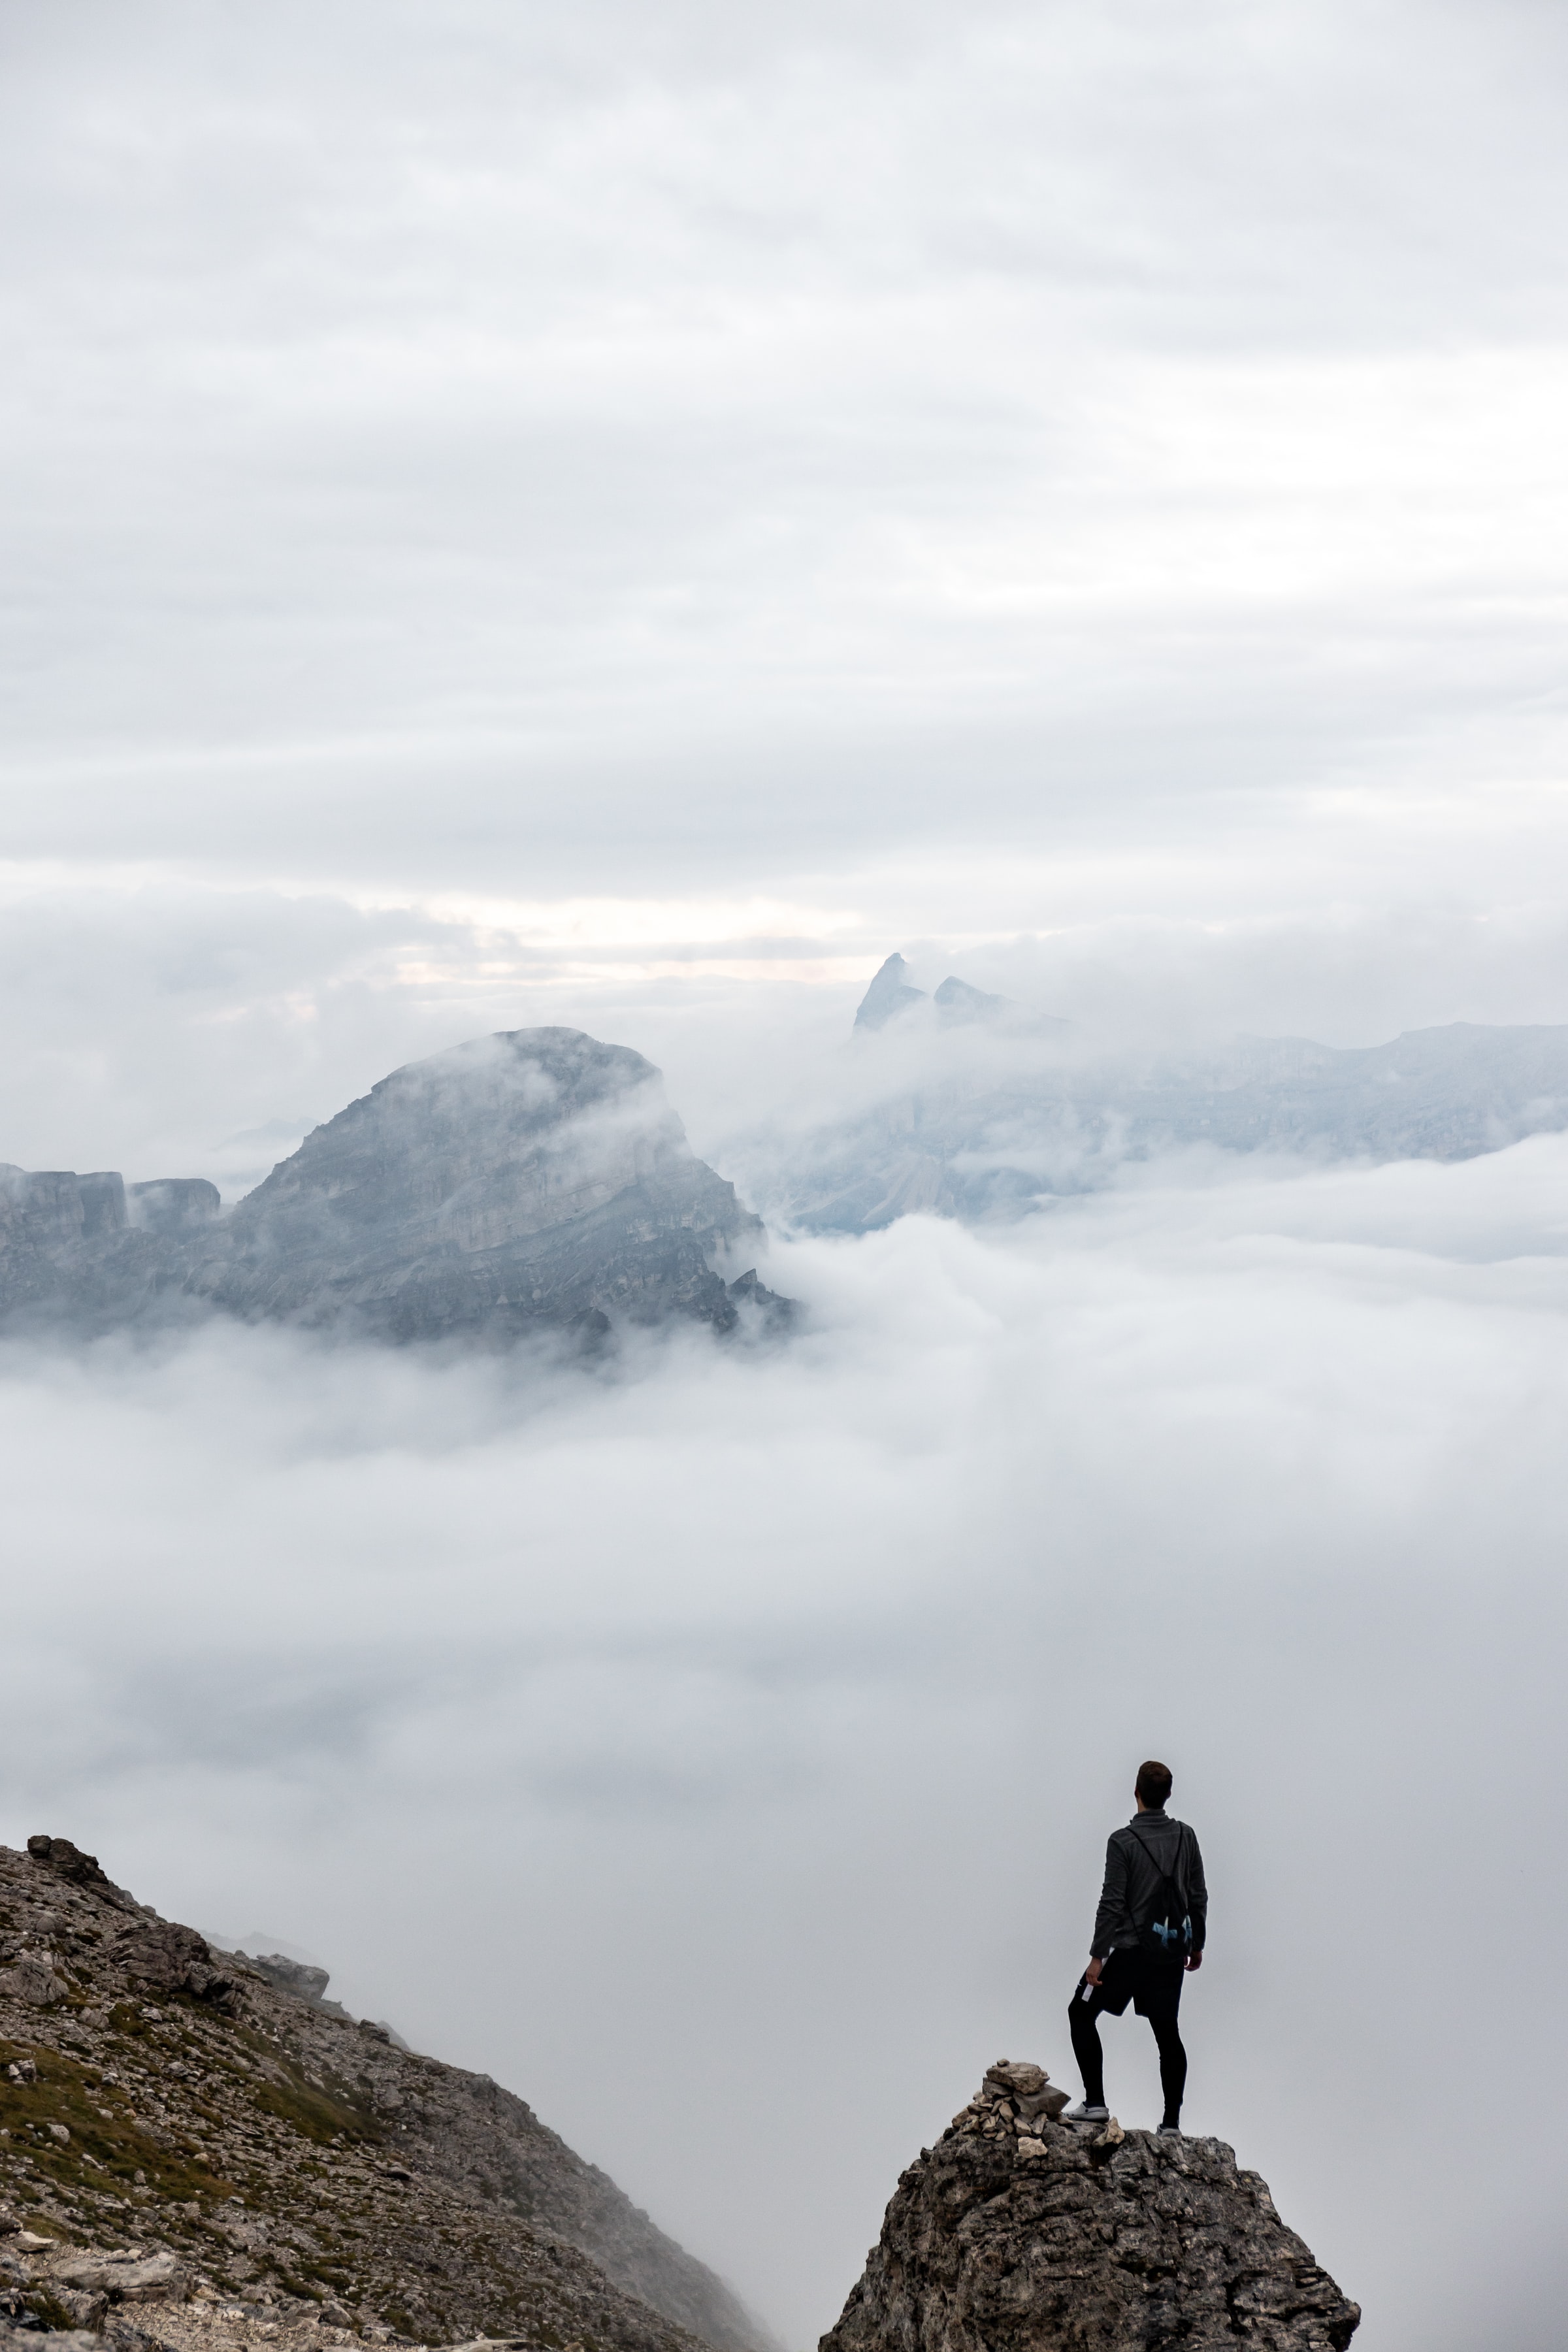 traveler, traveller, human, rocks, miscellanea, miscellaneous, fog, person, loneliness, alone, lonely